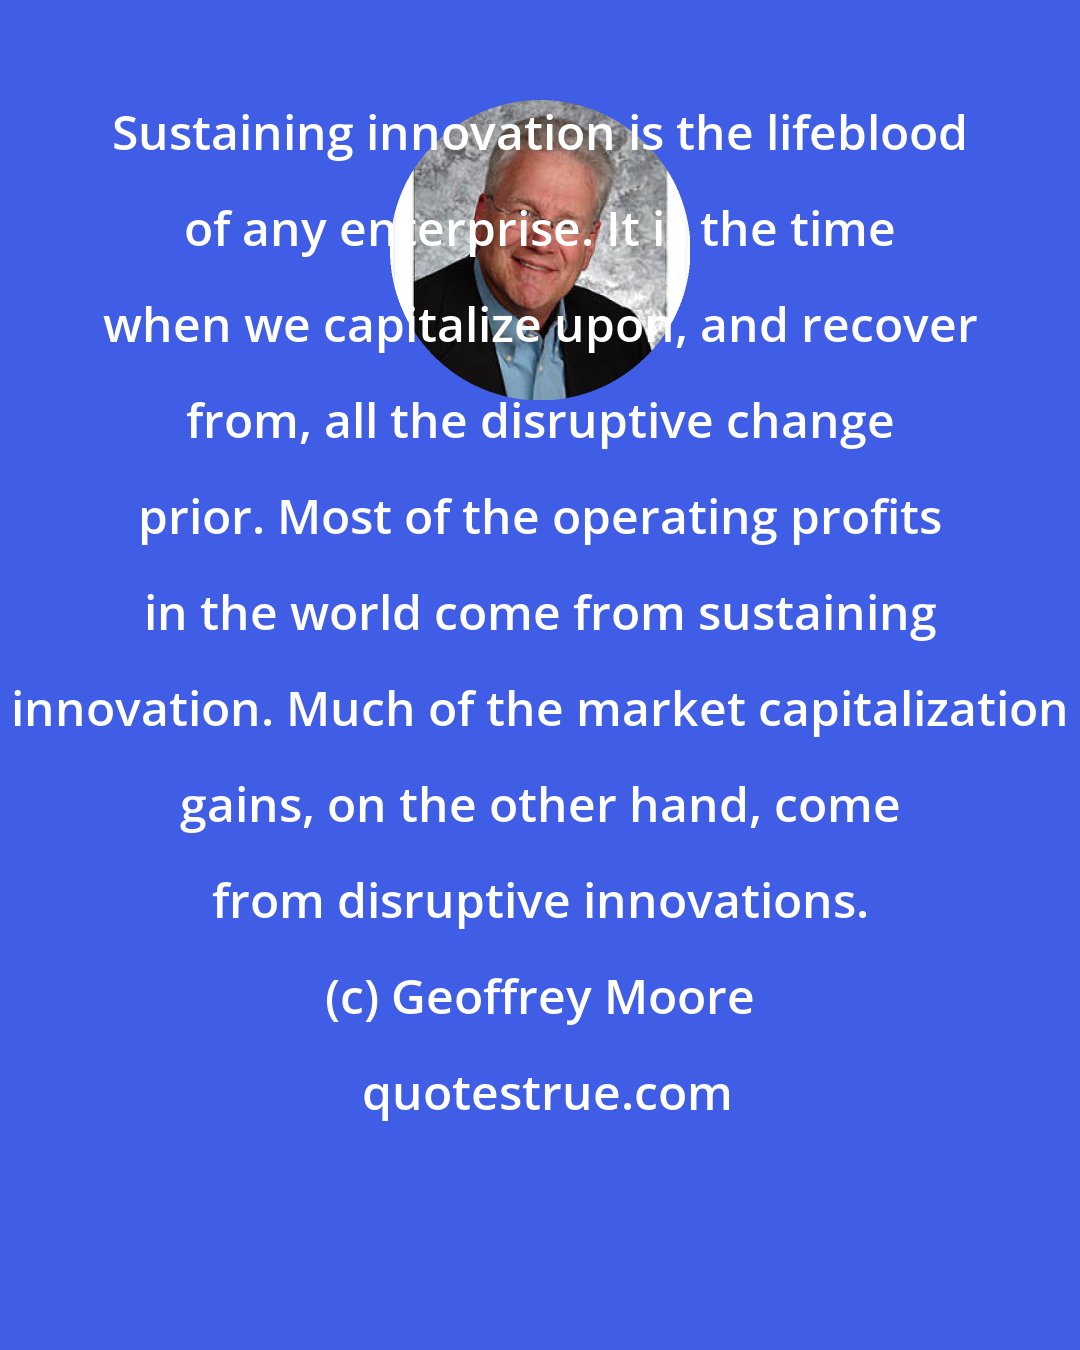 Geoffrey Moore: Sustaining innovation is the lifeblood of any enterprise. It is the time when we capitalize upon, and recover from, all the disruptive change prior. Most of the operating profits in the world come from sustaining innovation. Much of the market capitalization gains, on the other hand, come from disruptive innovations.